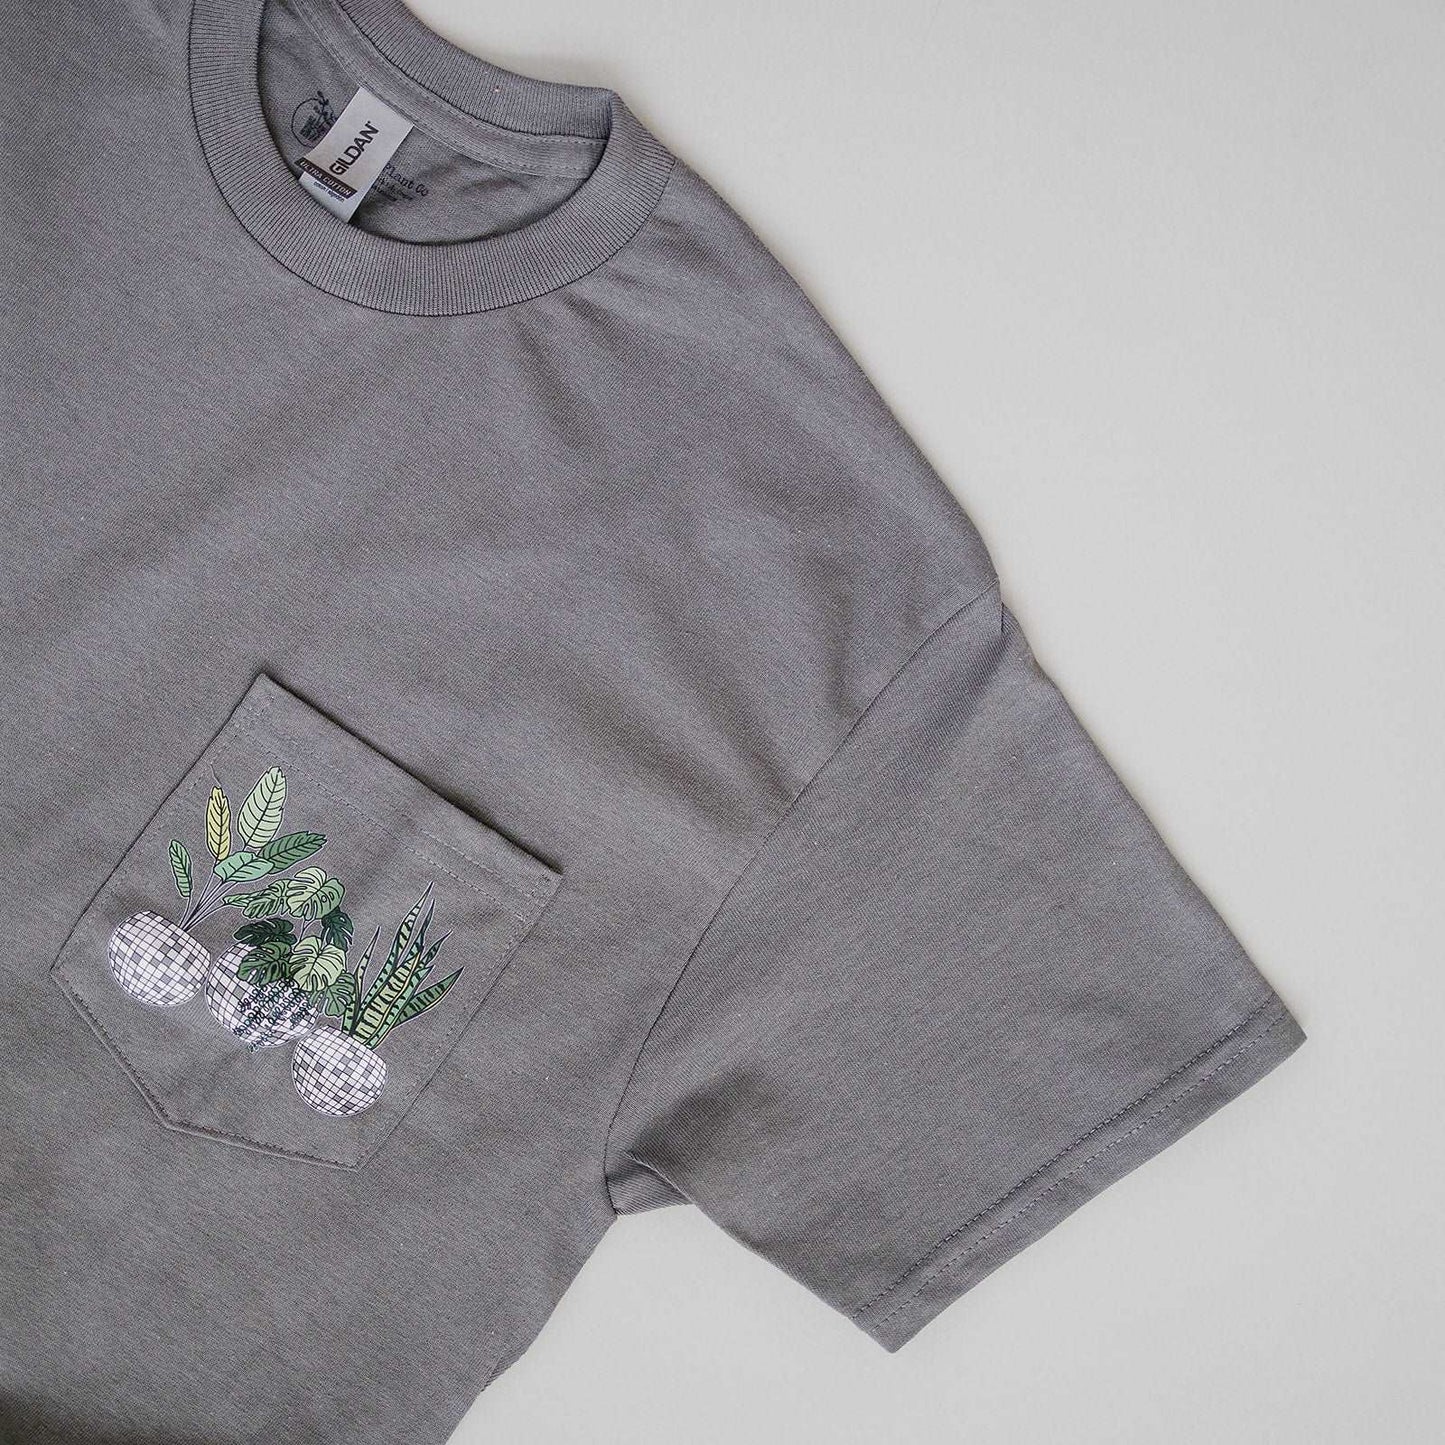 Plant Mama Pocket T-Shirt | Graphic T for Houseplant Lovers